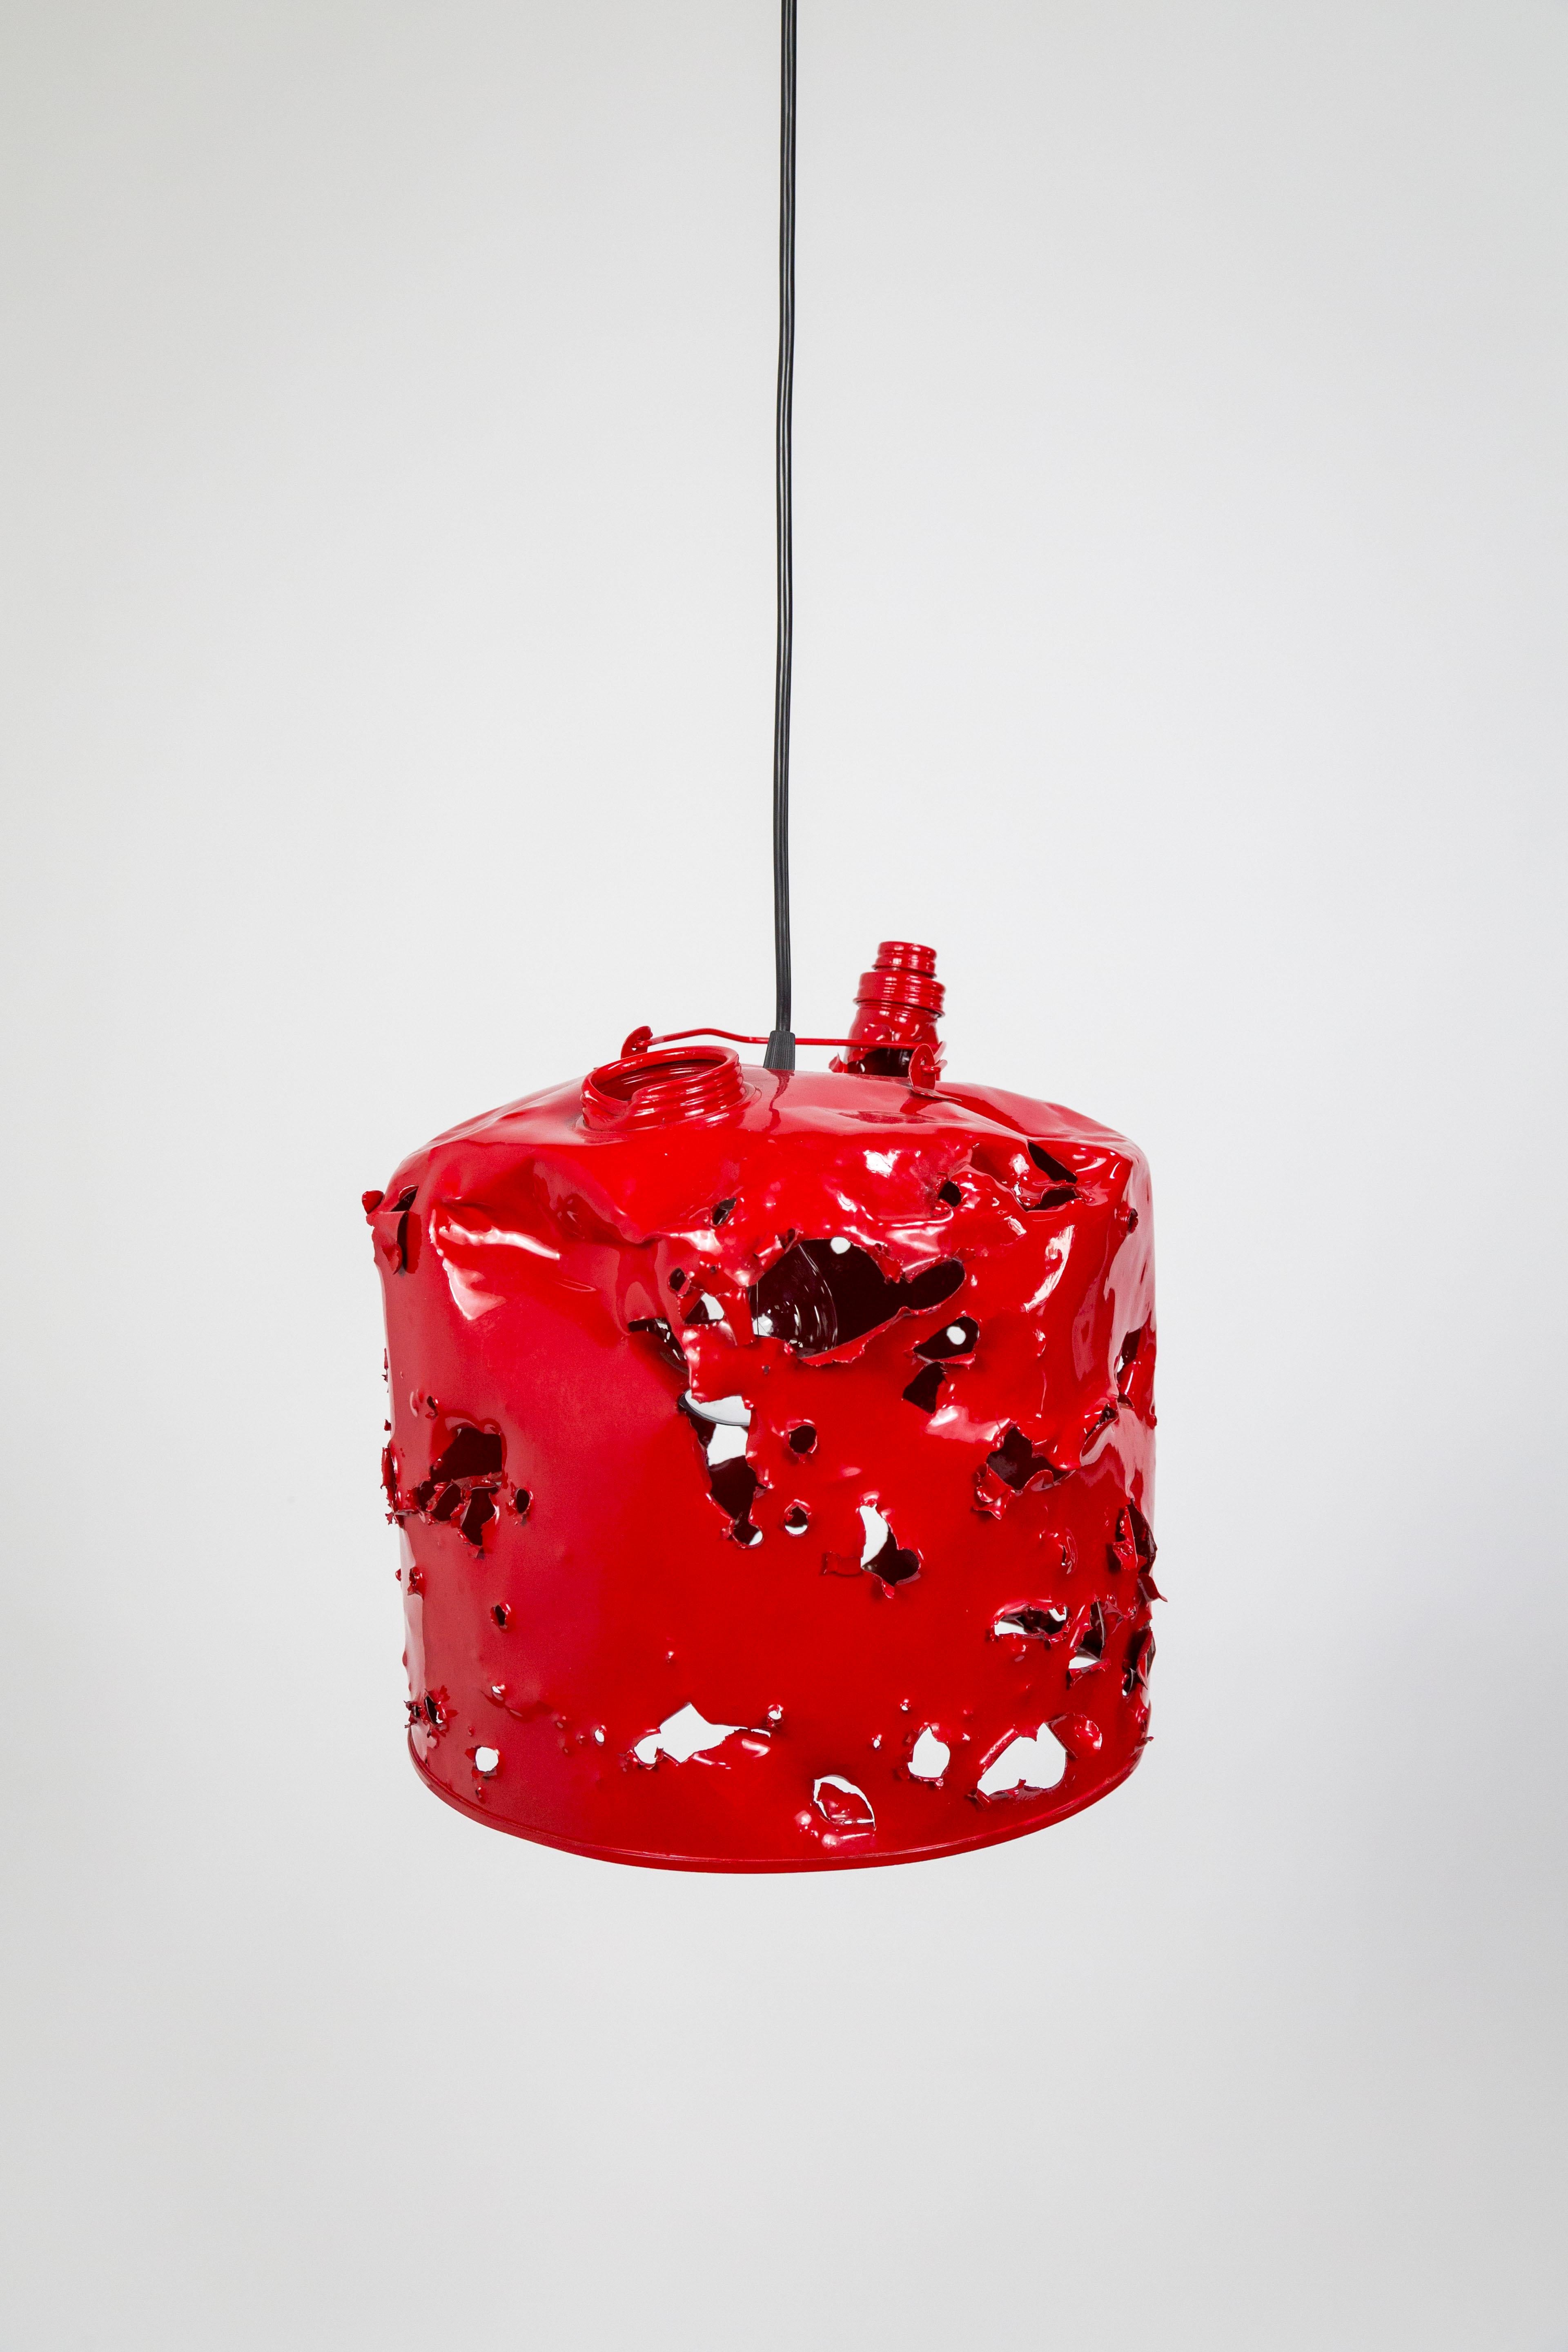 Powder-Coated Gas Can Pendant Light by Charles Linder